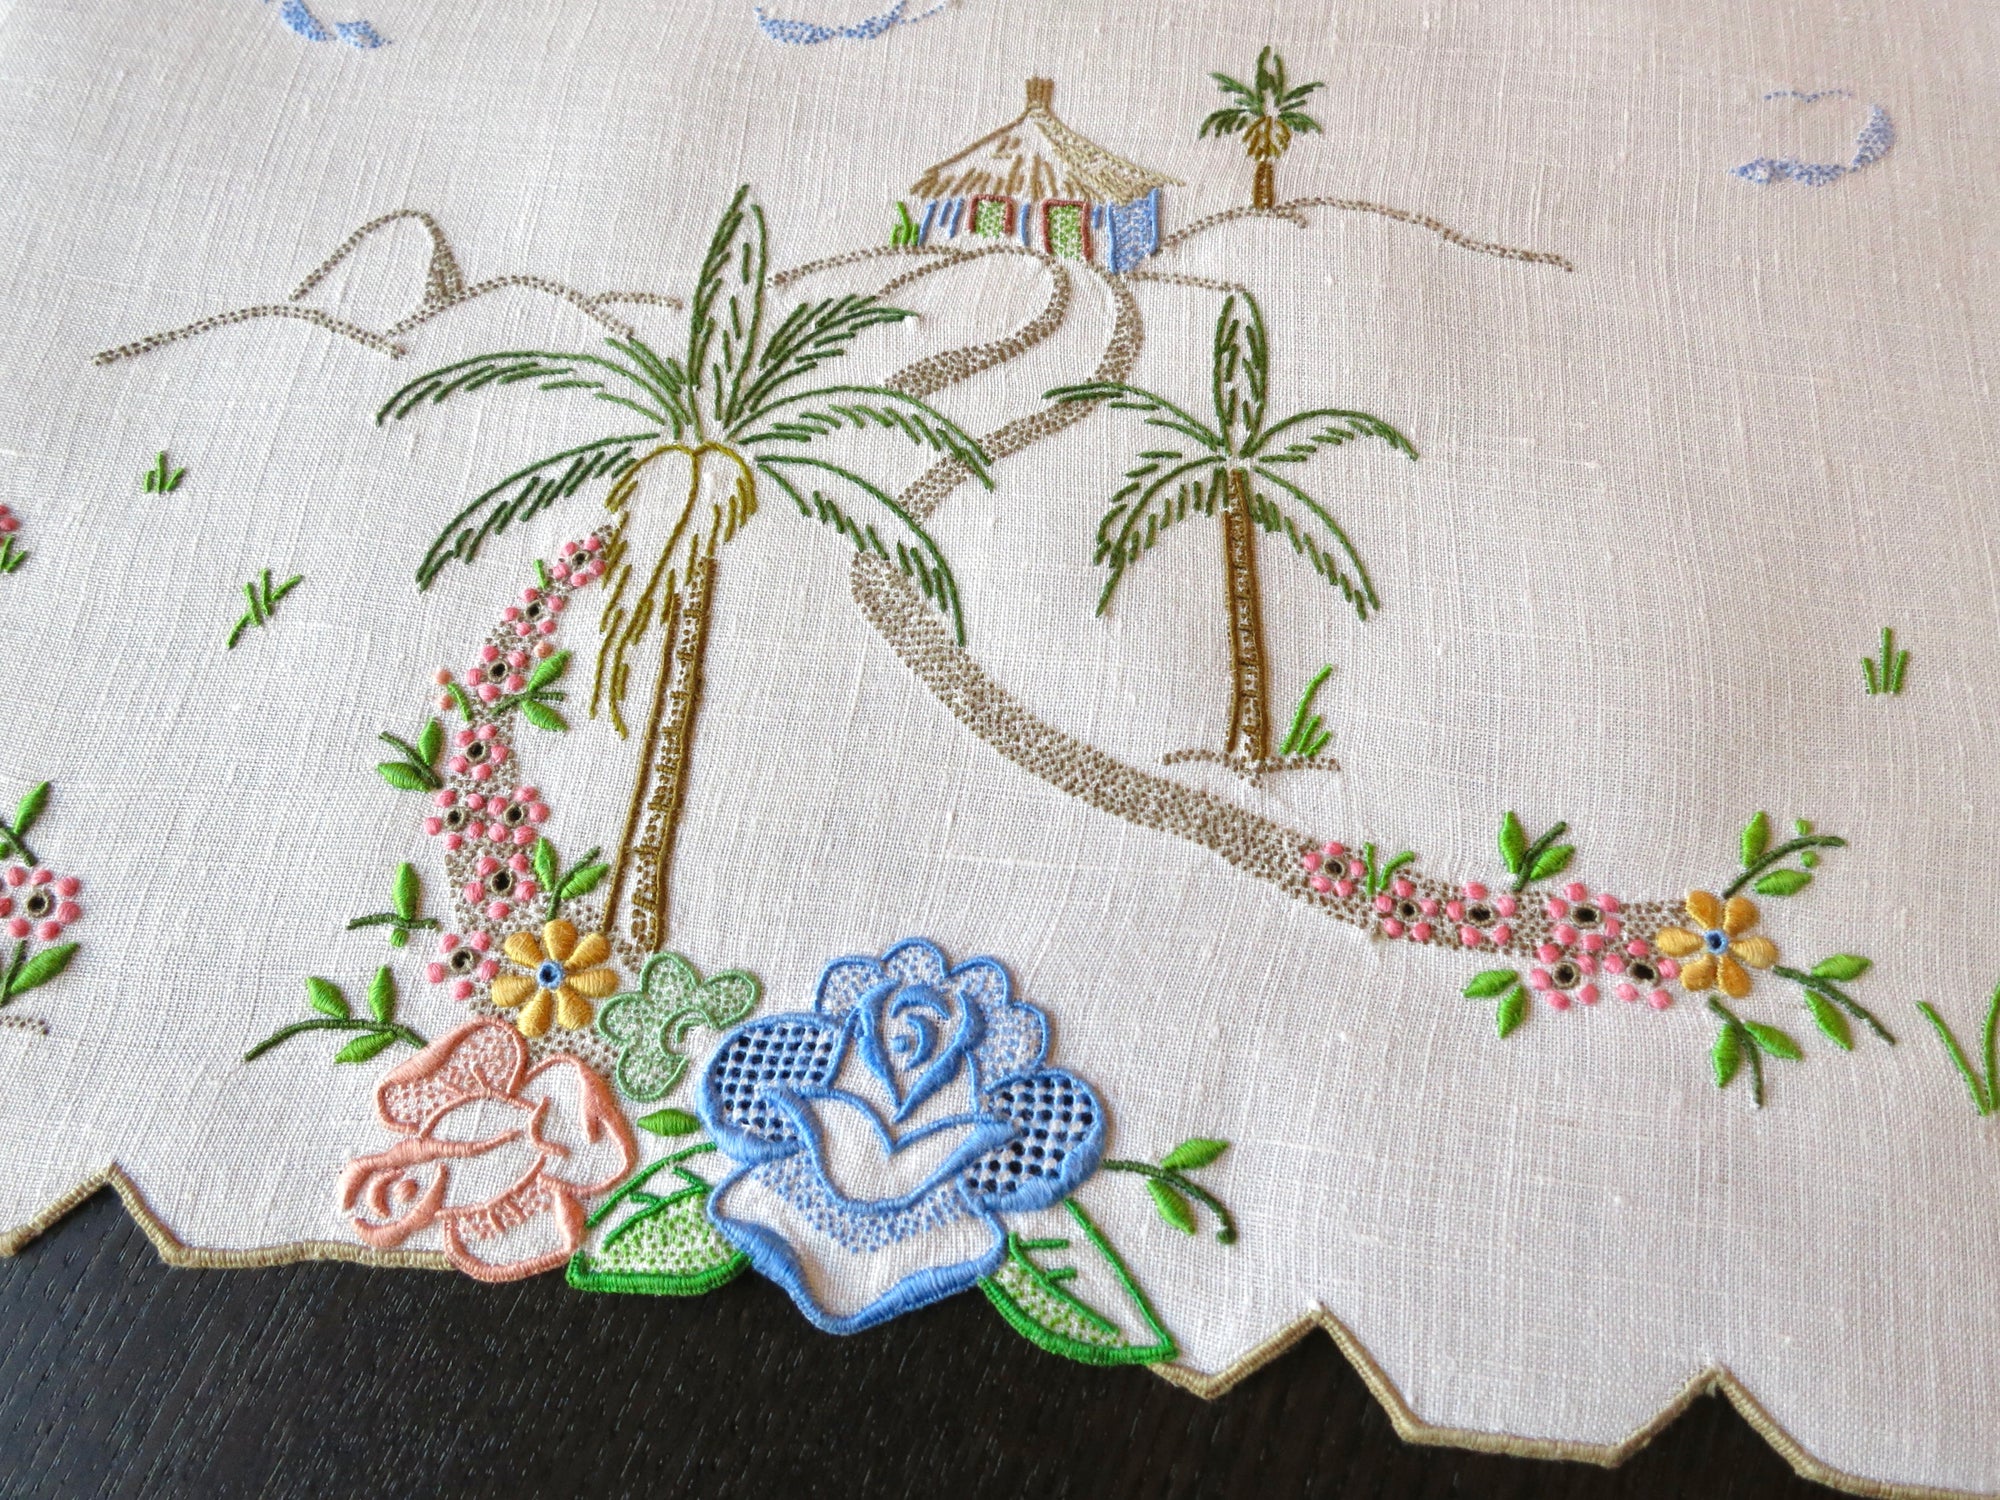 Tropical Vibes Colorful Vintage Madeira Embroidery Linen Table Runner 13x26"